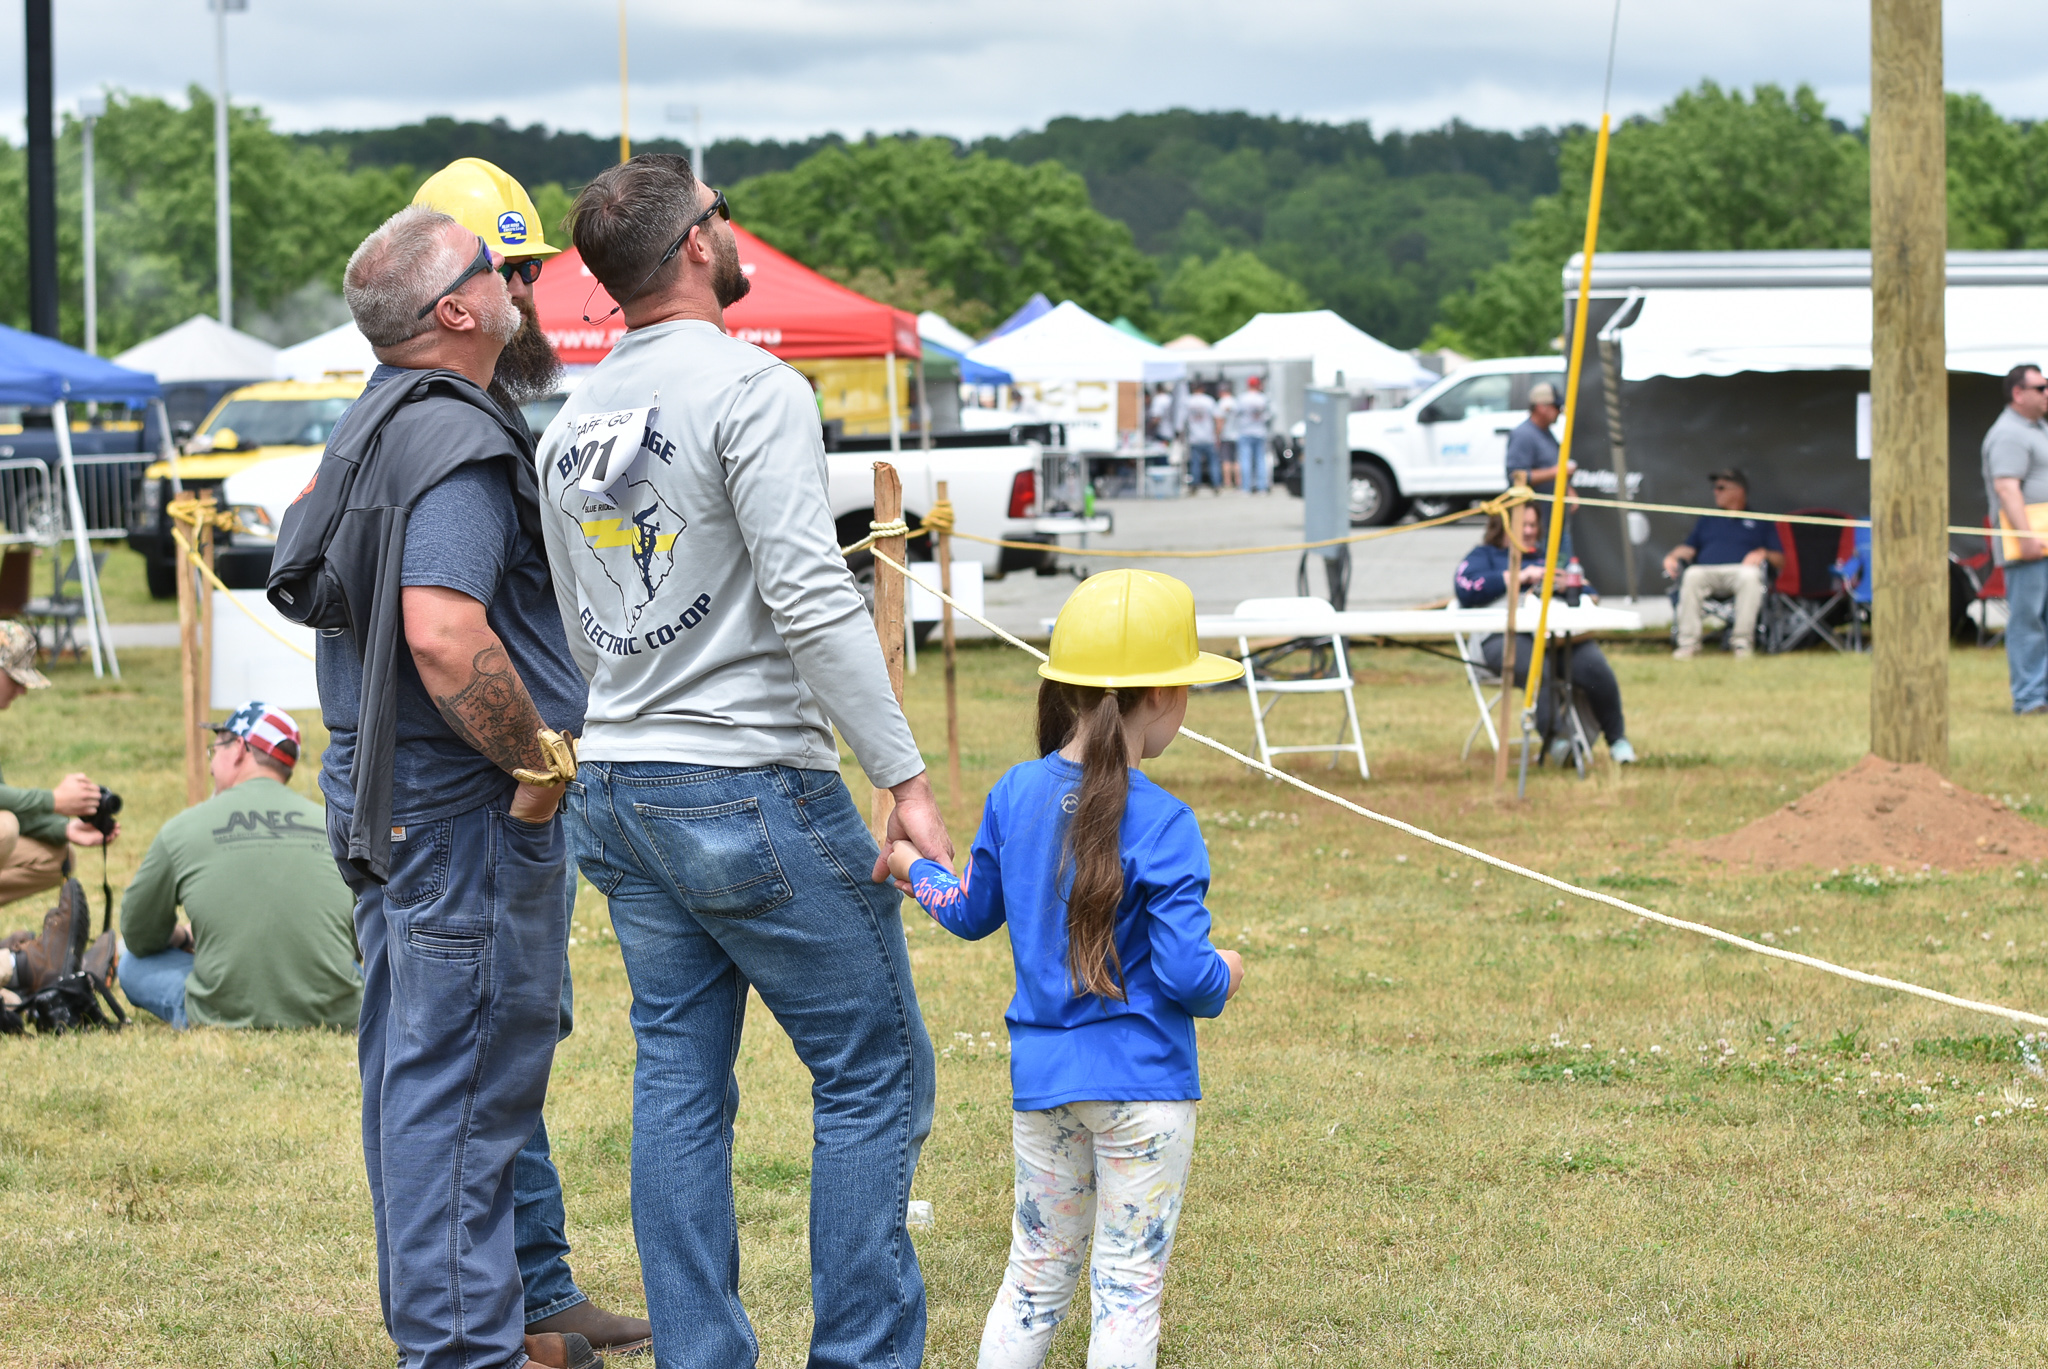 Competitors and their families watch as teams compete in today's rodeo.